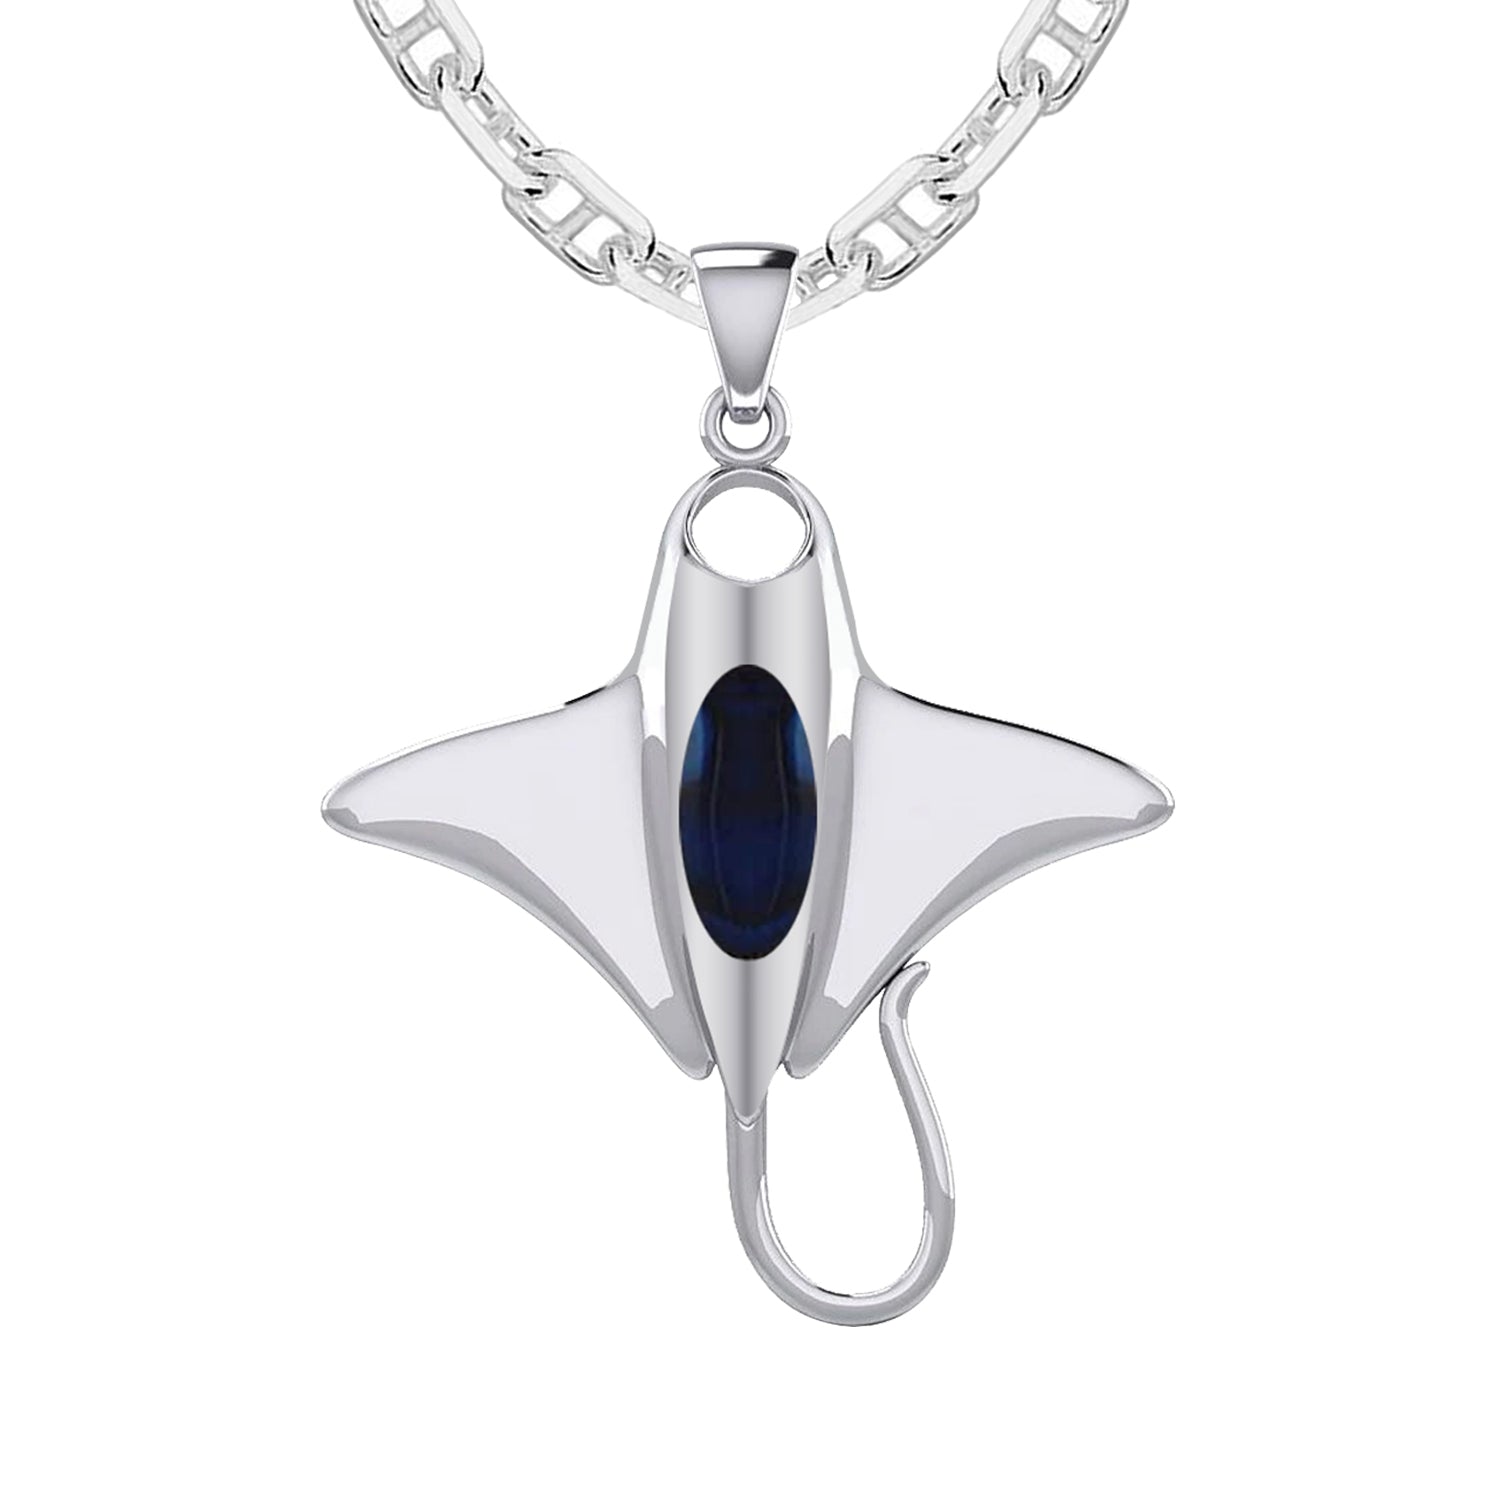 Men's 925 Sterling Silver 30.5mm 3D Manta or Sting Ray Aquatic Pendant Necklace - US Jewels